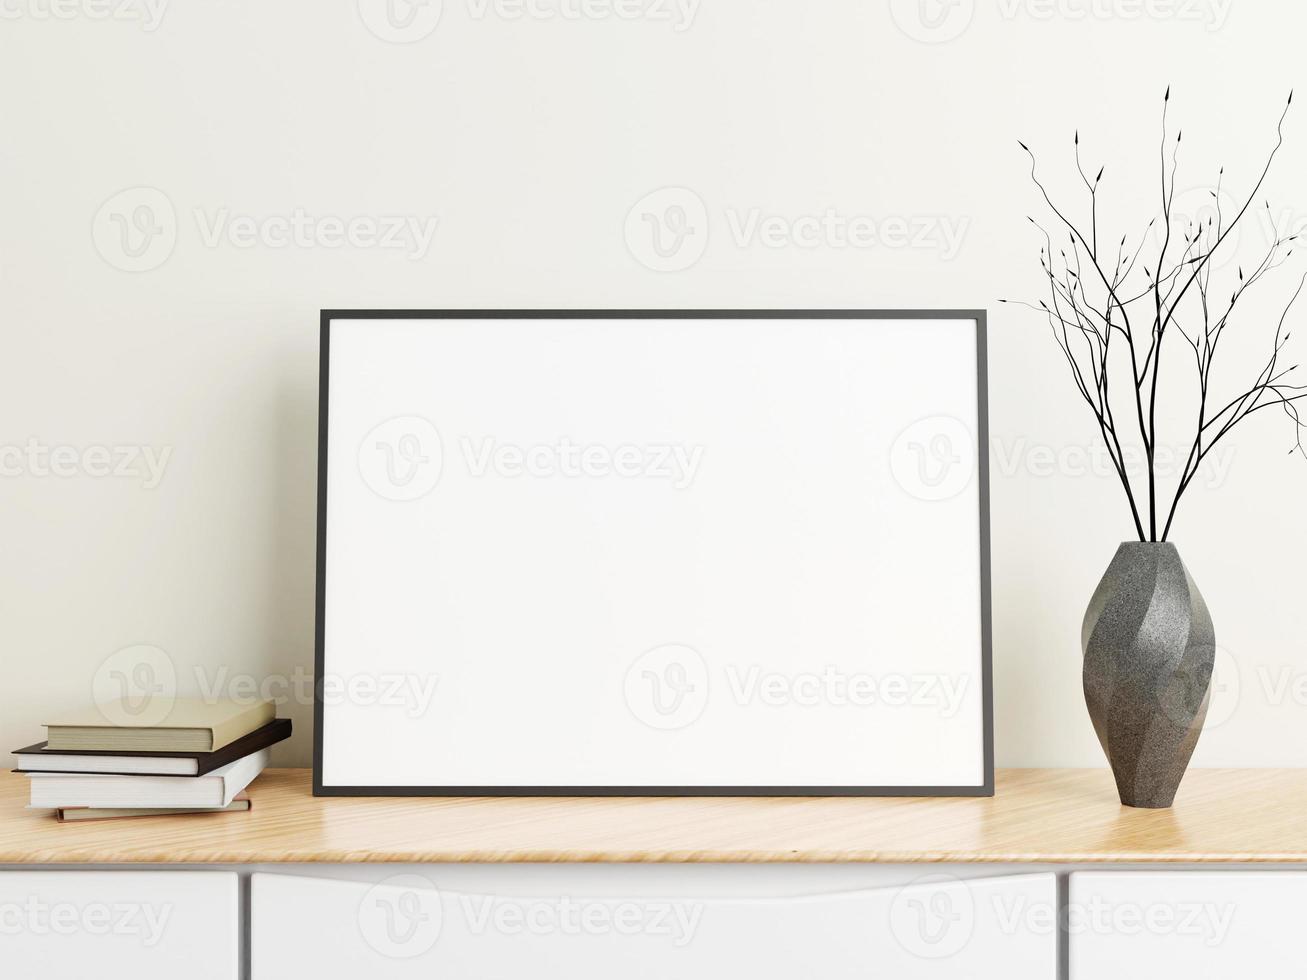 Minimalist horizontal black poster or photo frame mockup on wood table with books and vase in a room. 3D Rendering.